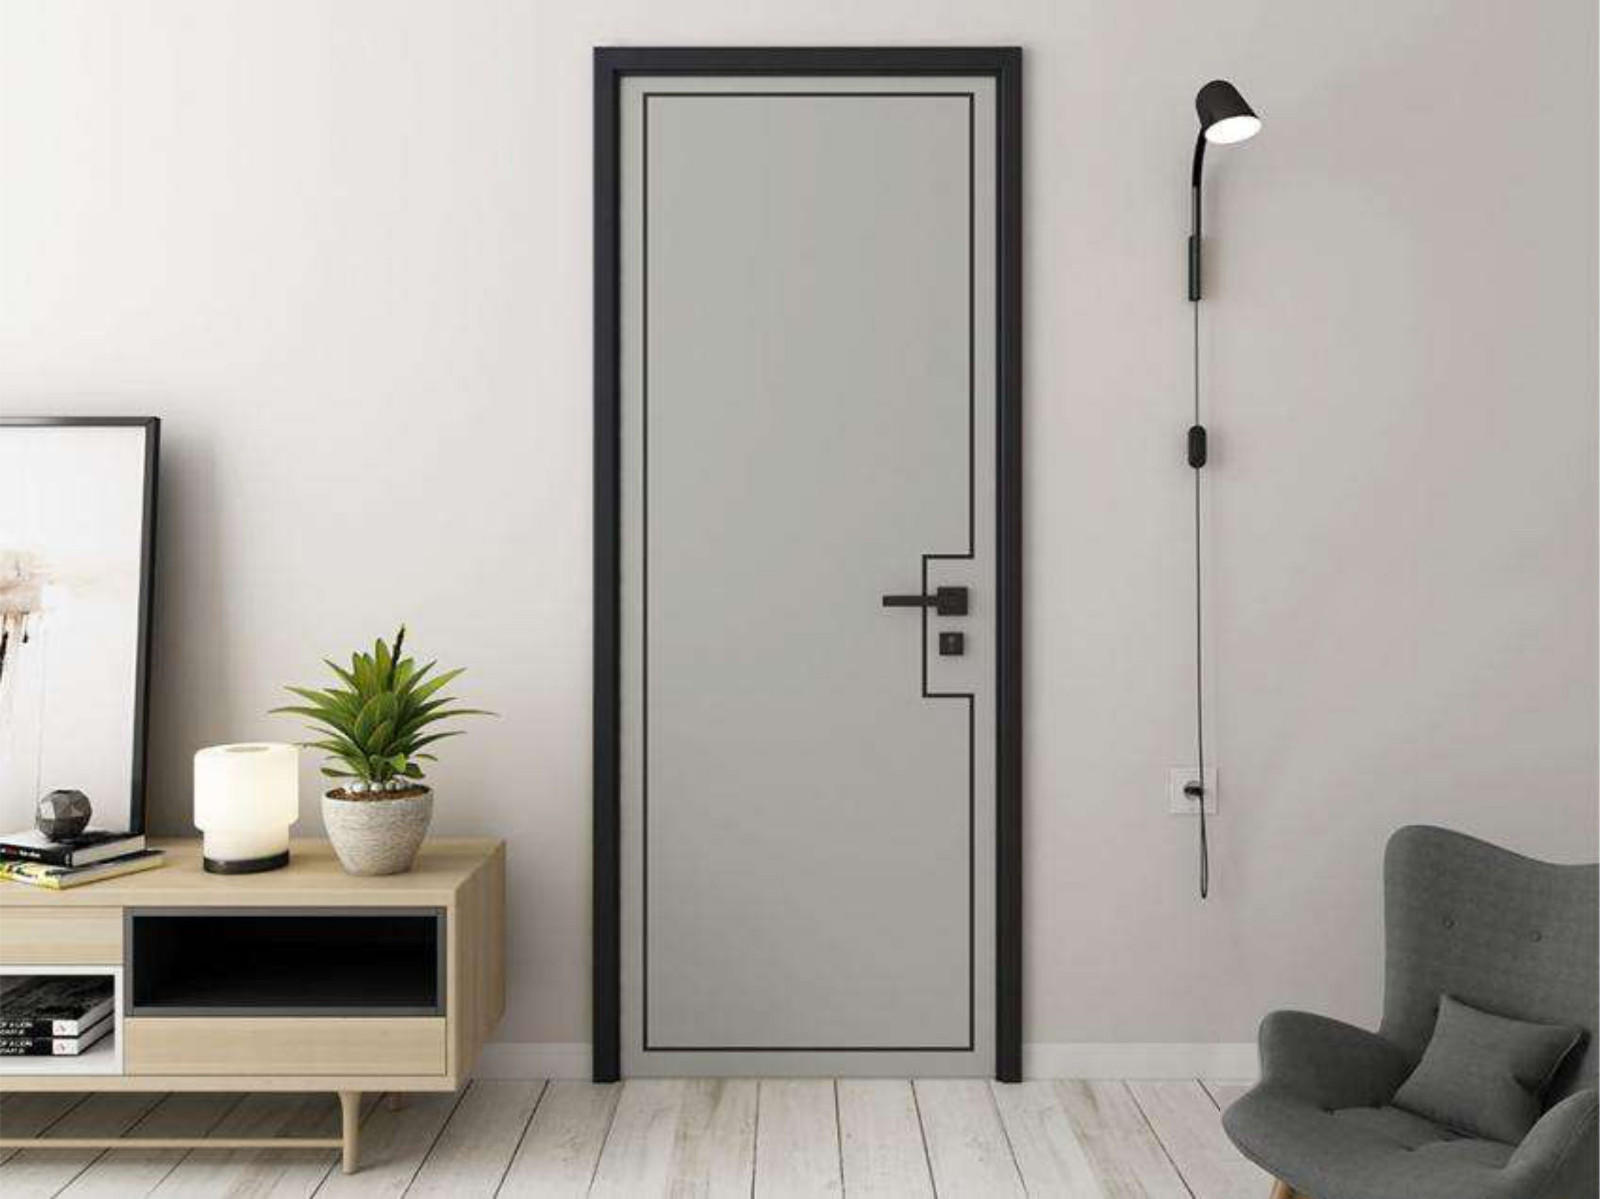 Casen fashion cheap doors new arrival for decoration-1